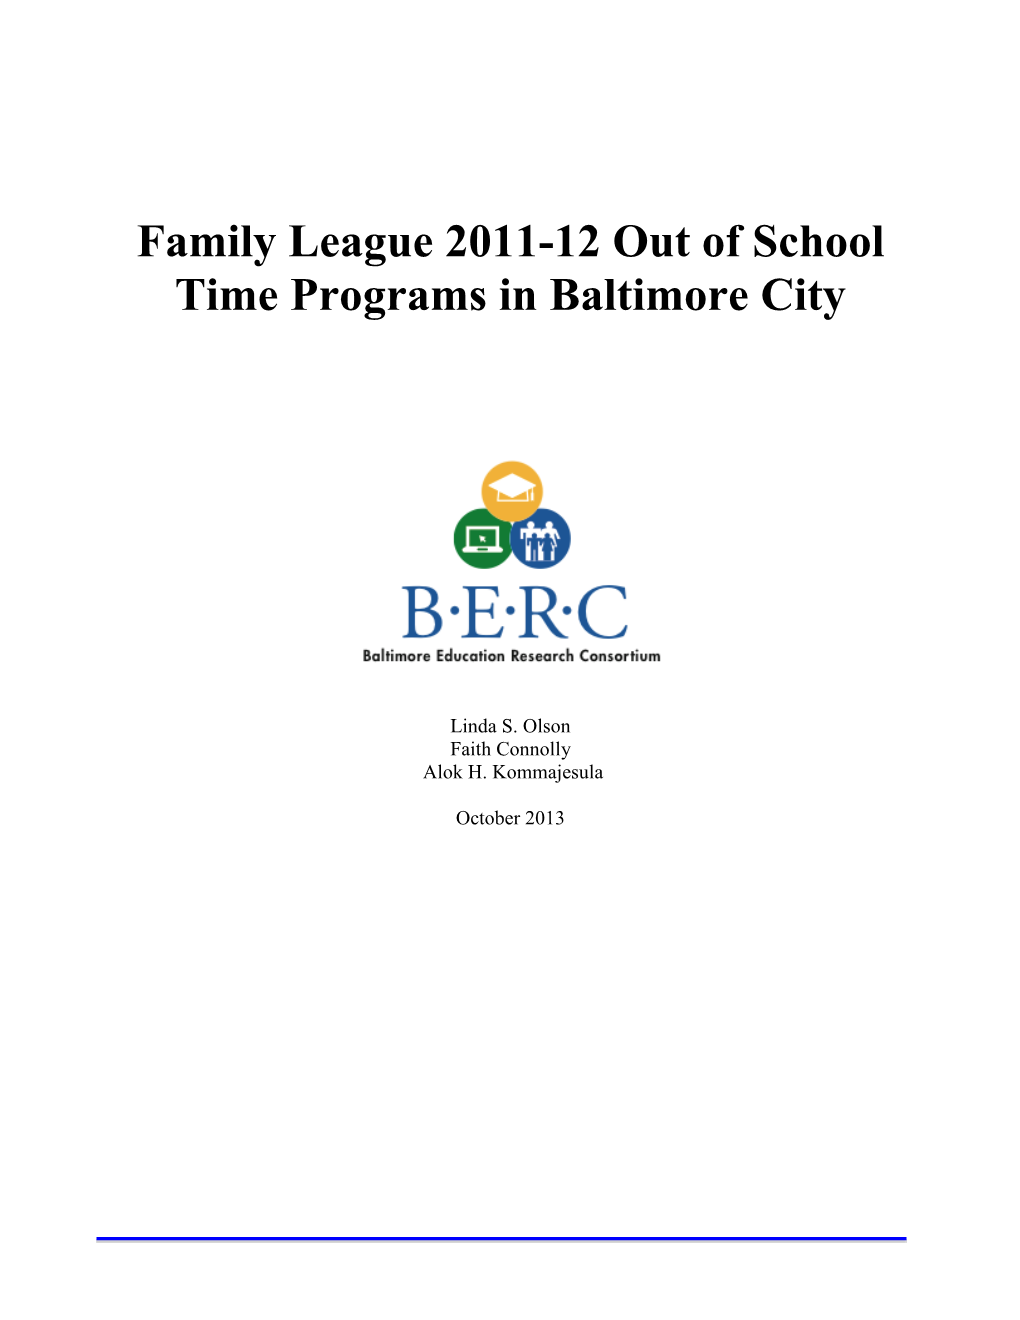 Family League 2011-12 out of School Time Programs in Baltimore City